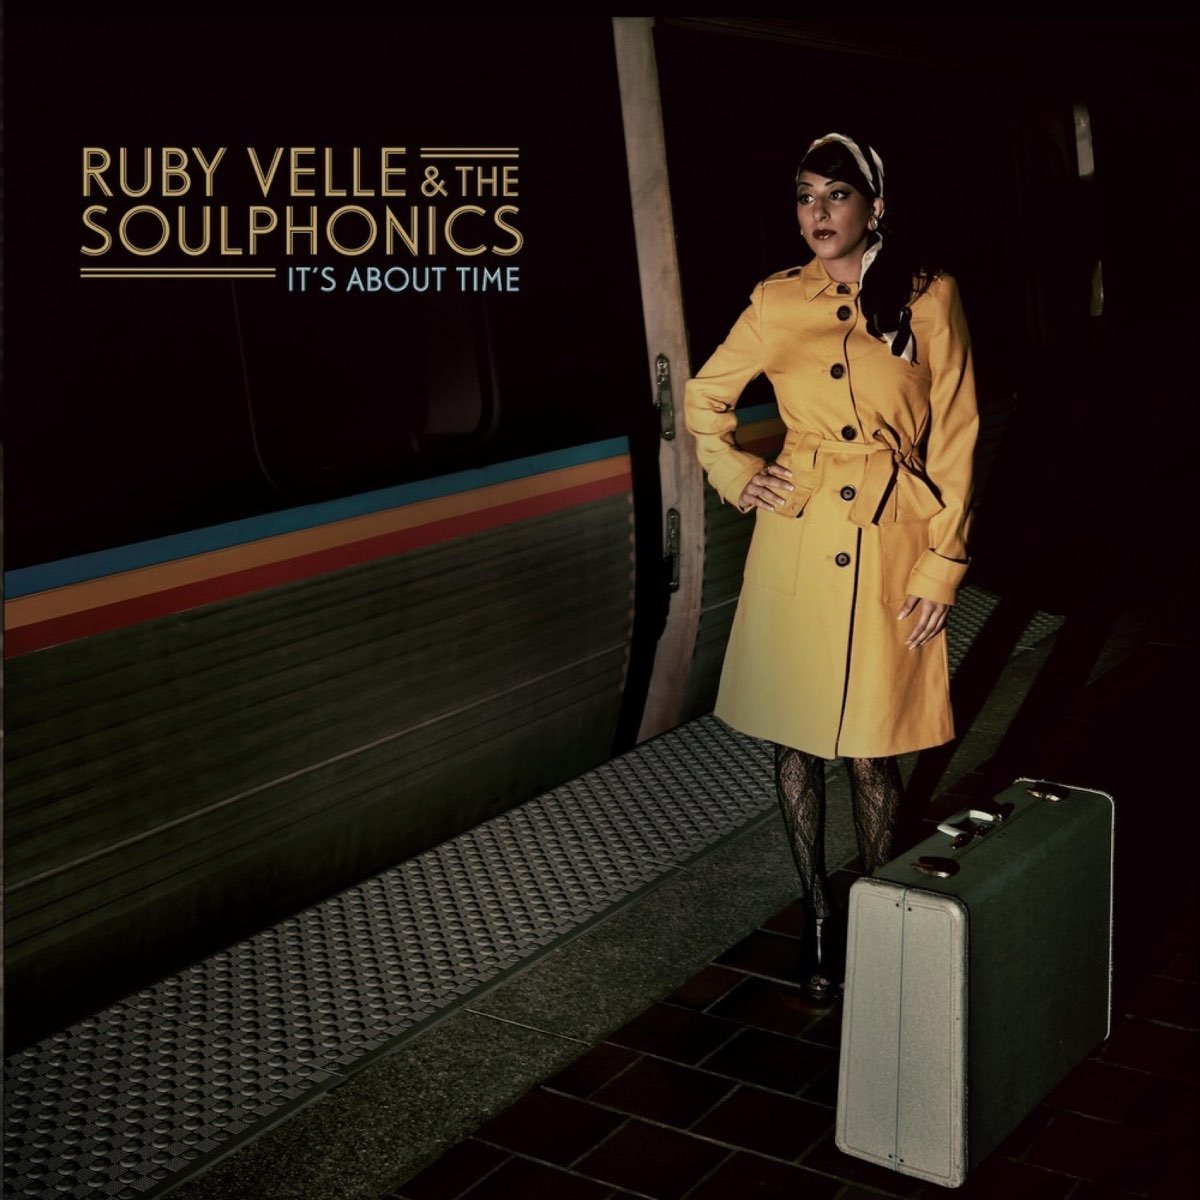 Ruby Velle & The Soulphonics - It's About Time (2012) FLAC Download